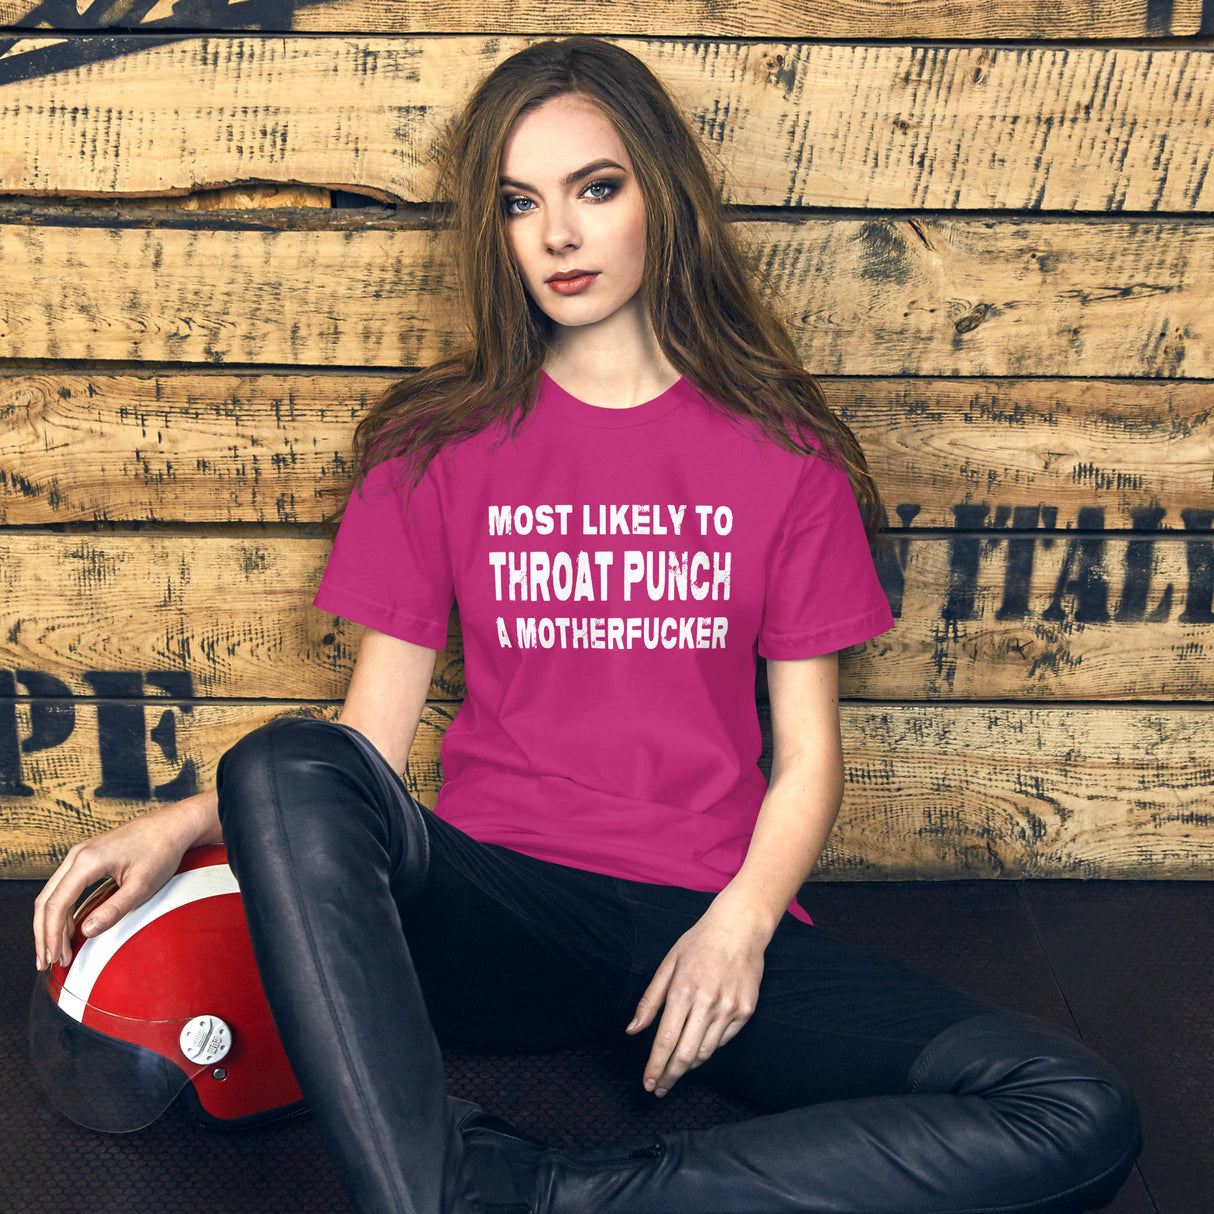 Most Likely To Throat Punch a Motherfucker Women's Shirt